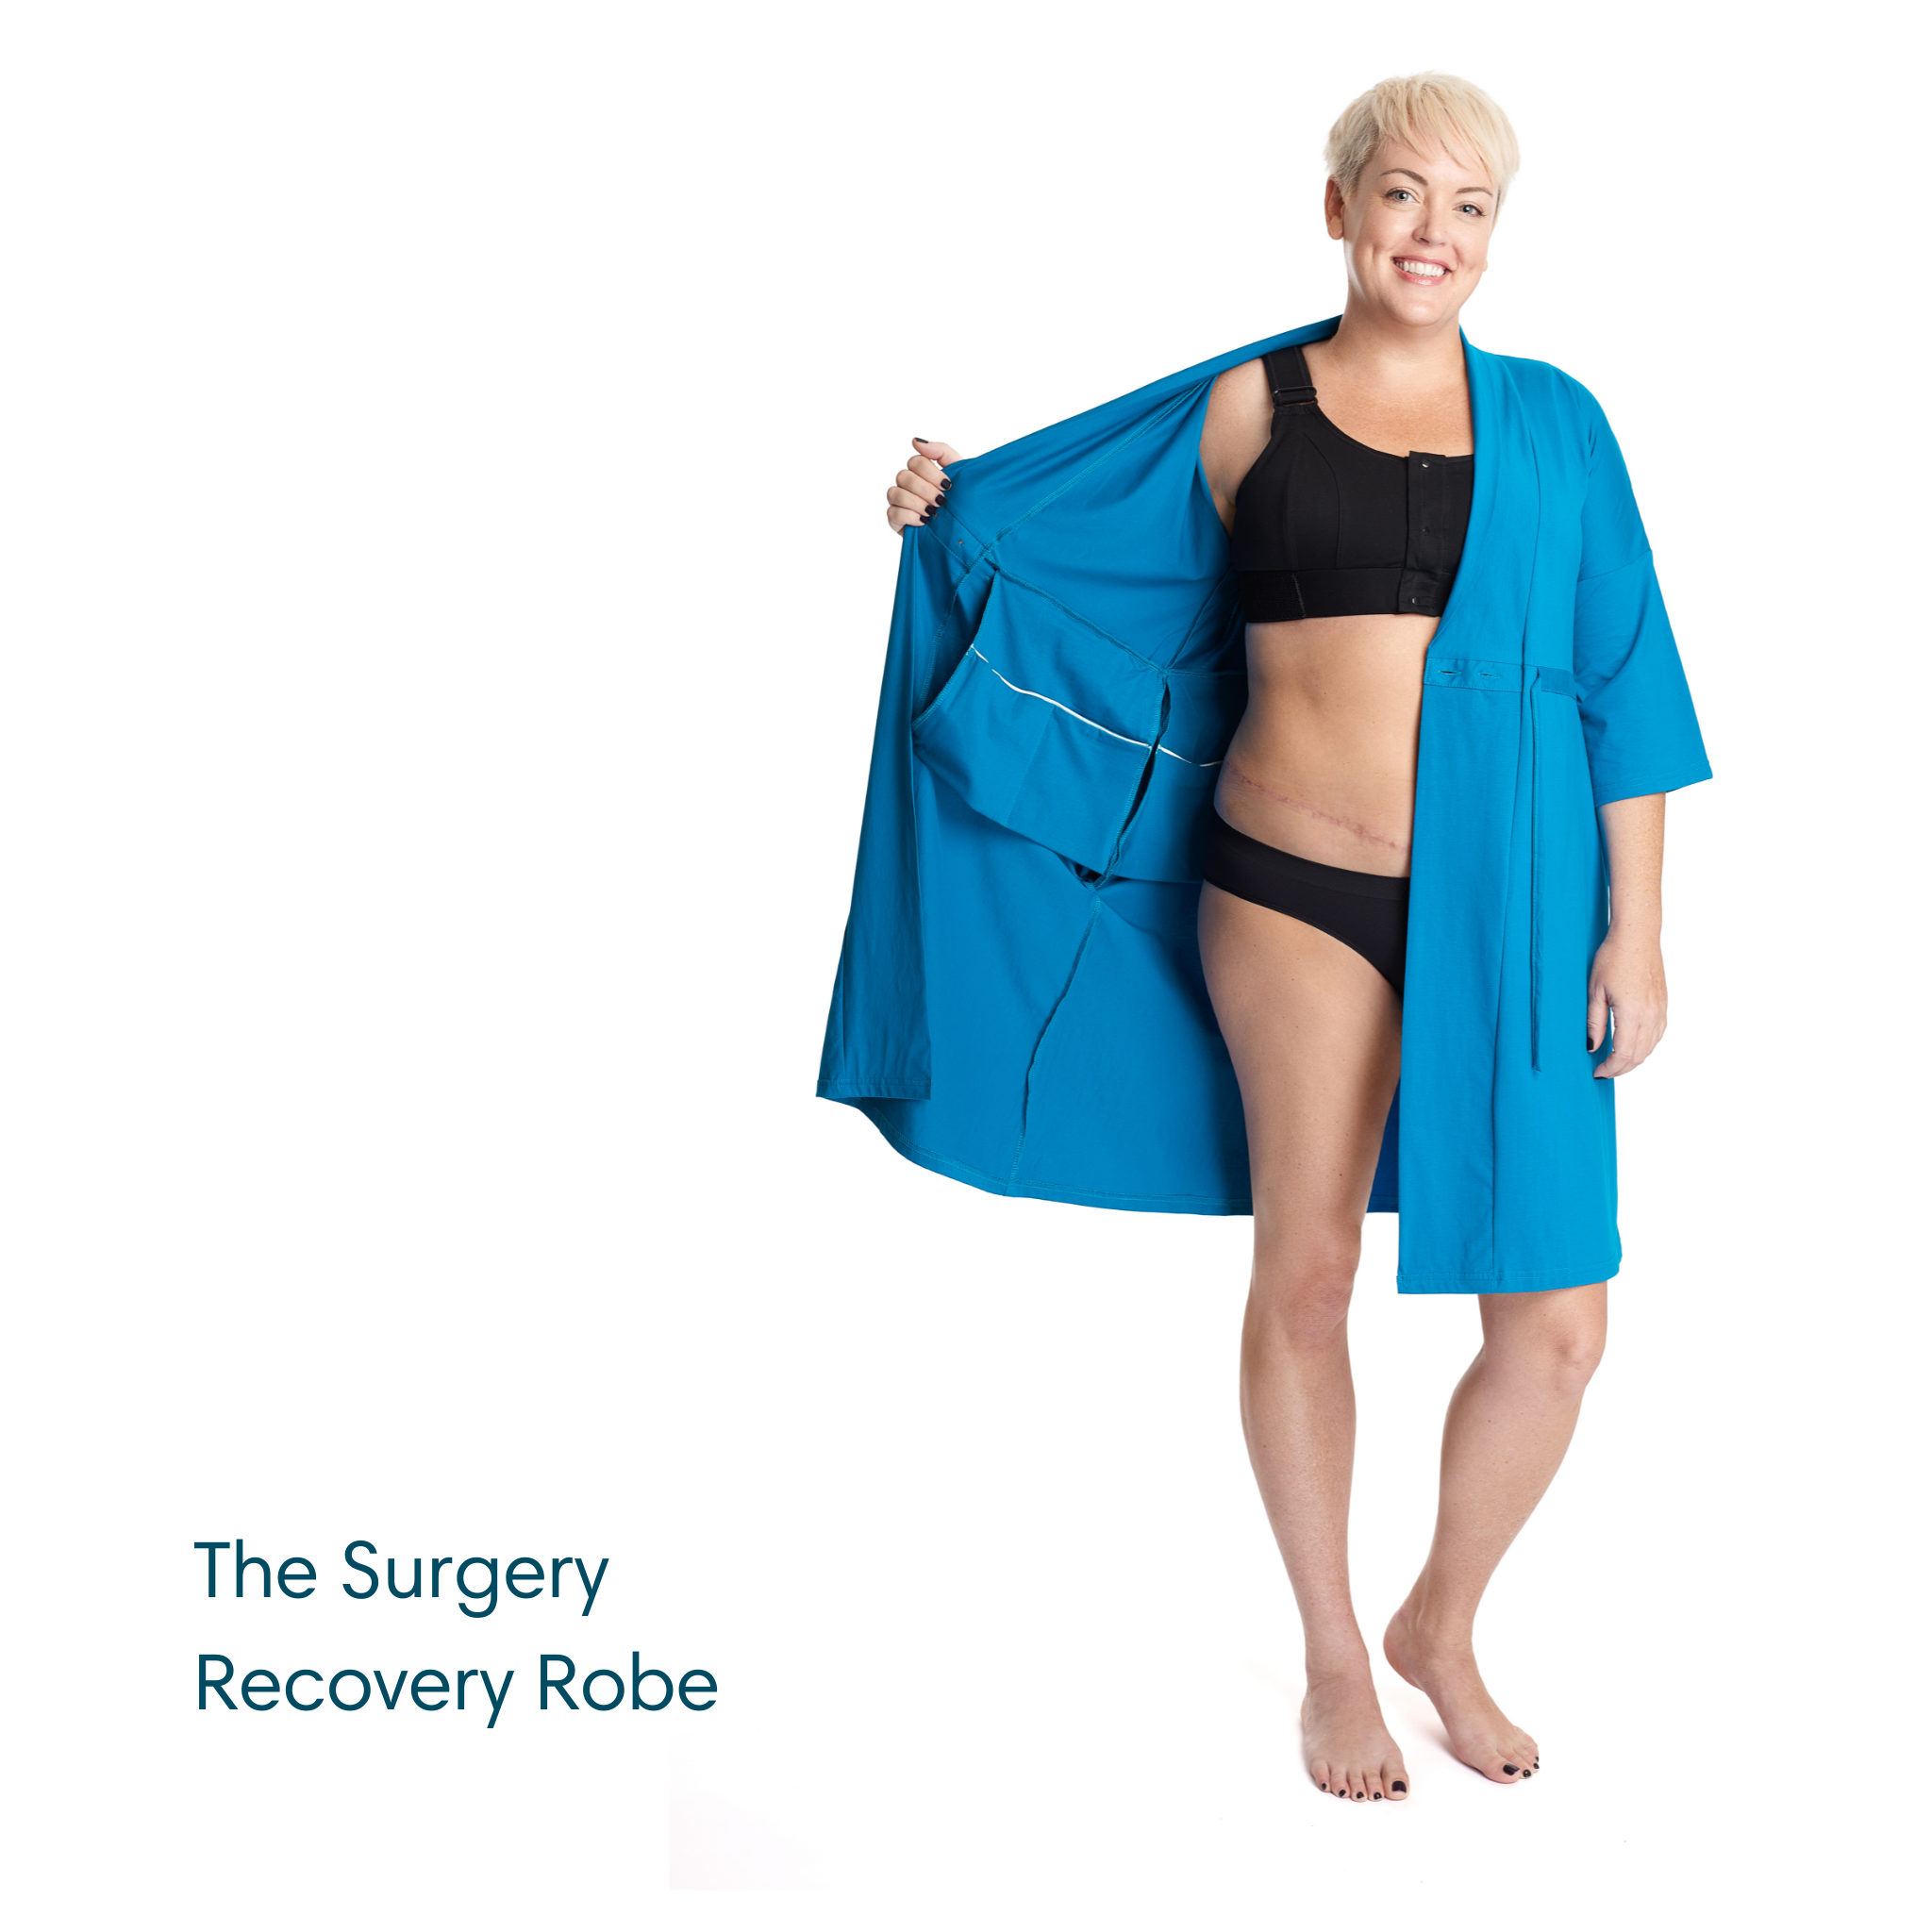 The Surgery Recovery Robe